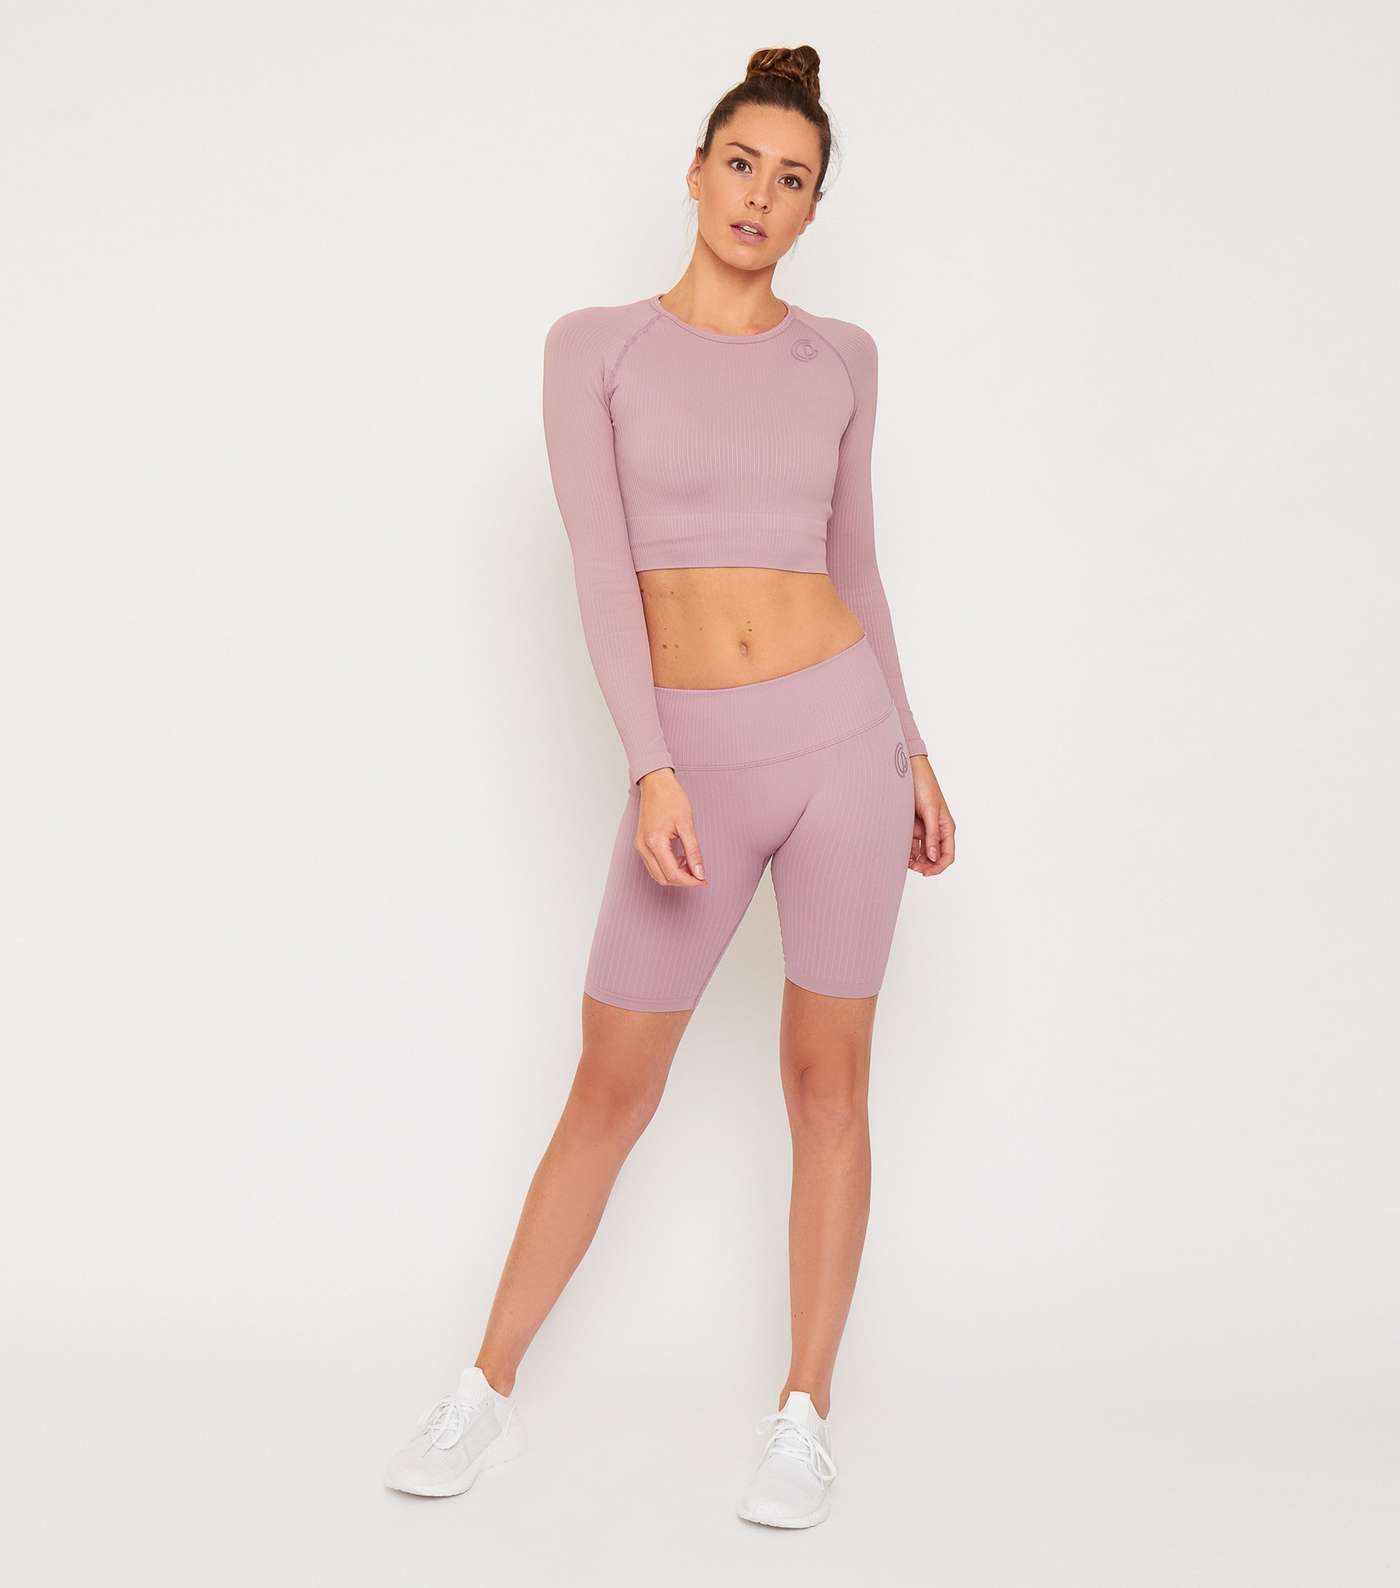 GymPro Pale Pink Ribbed Long Sleeve Sports Crop Top Image 2